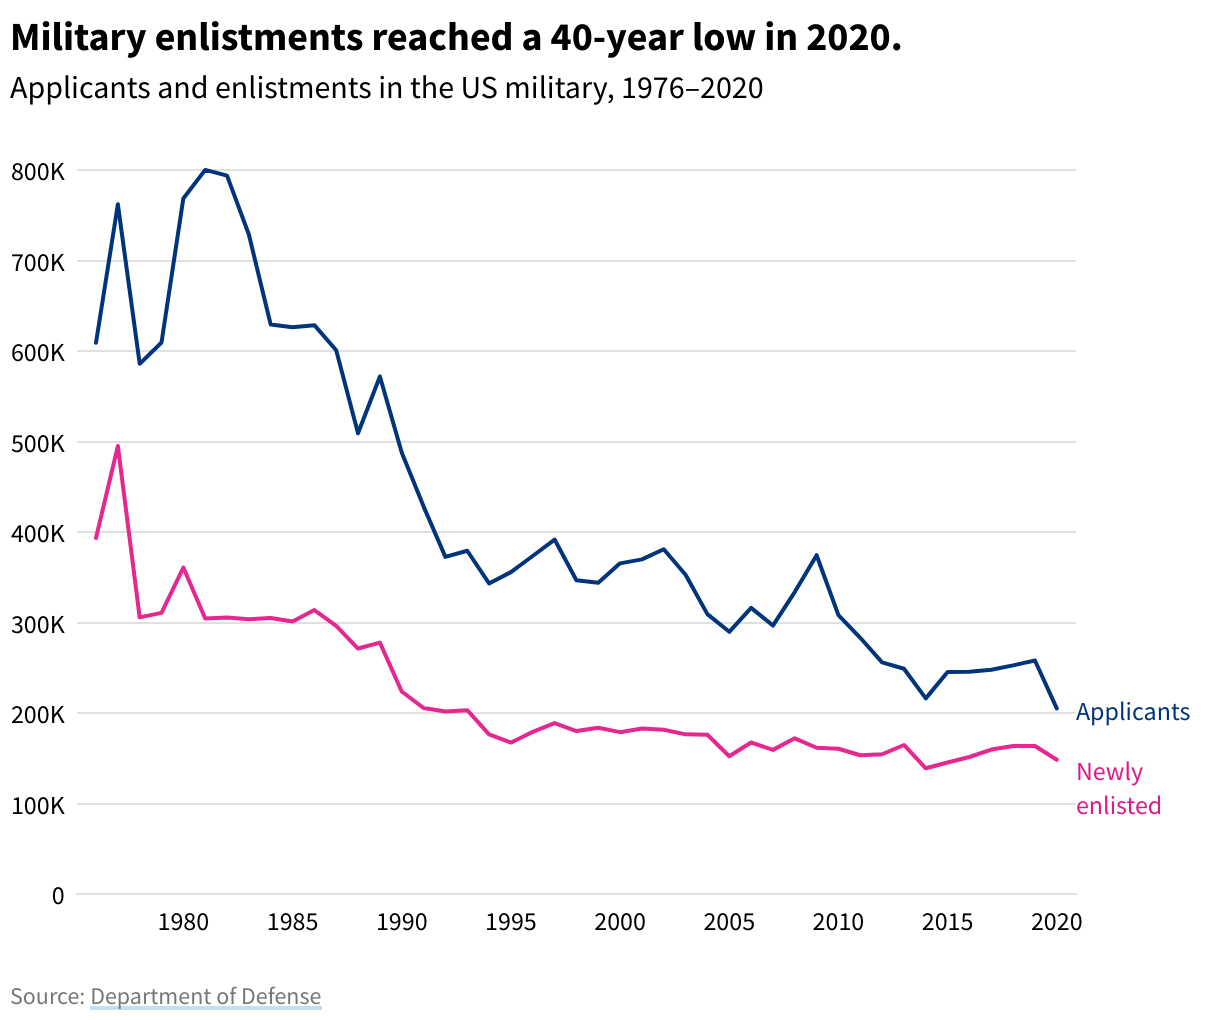 Line graph showing a comparison between military applicants and enlistments from 1976-2020, with enlistments reaching a 40-year low in 2020. 